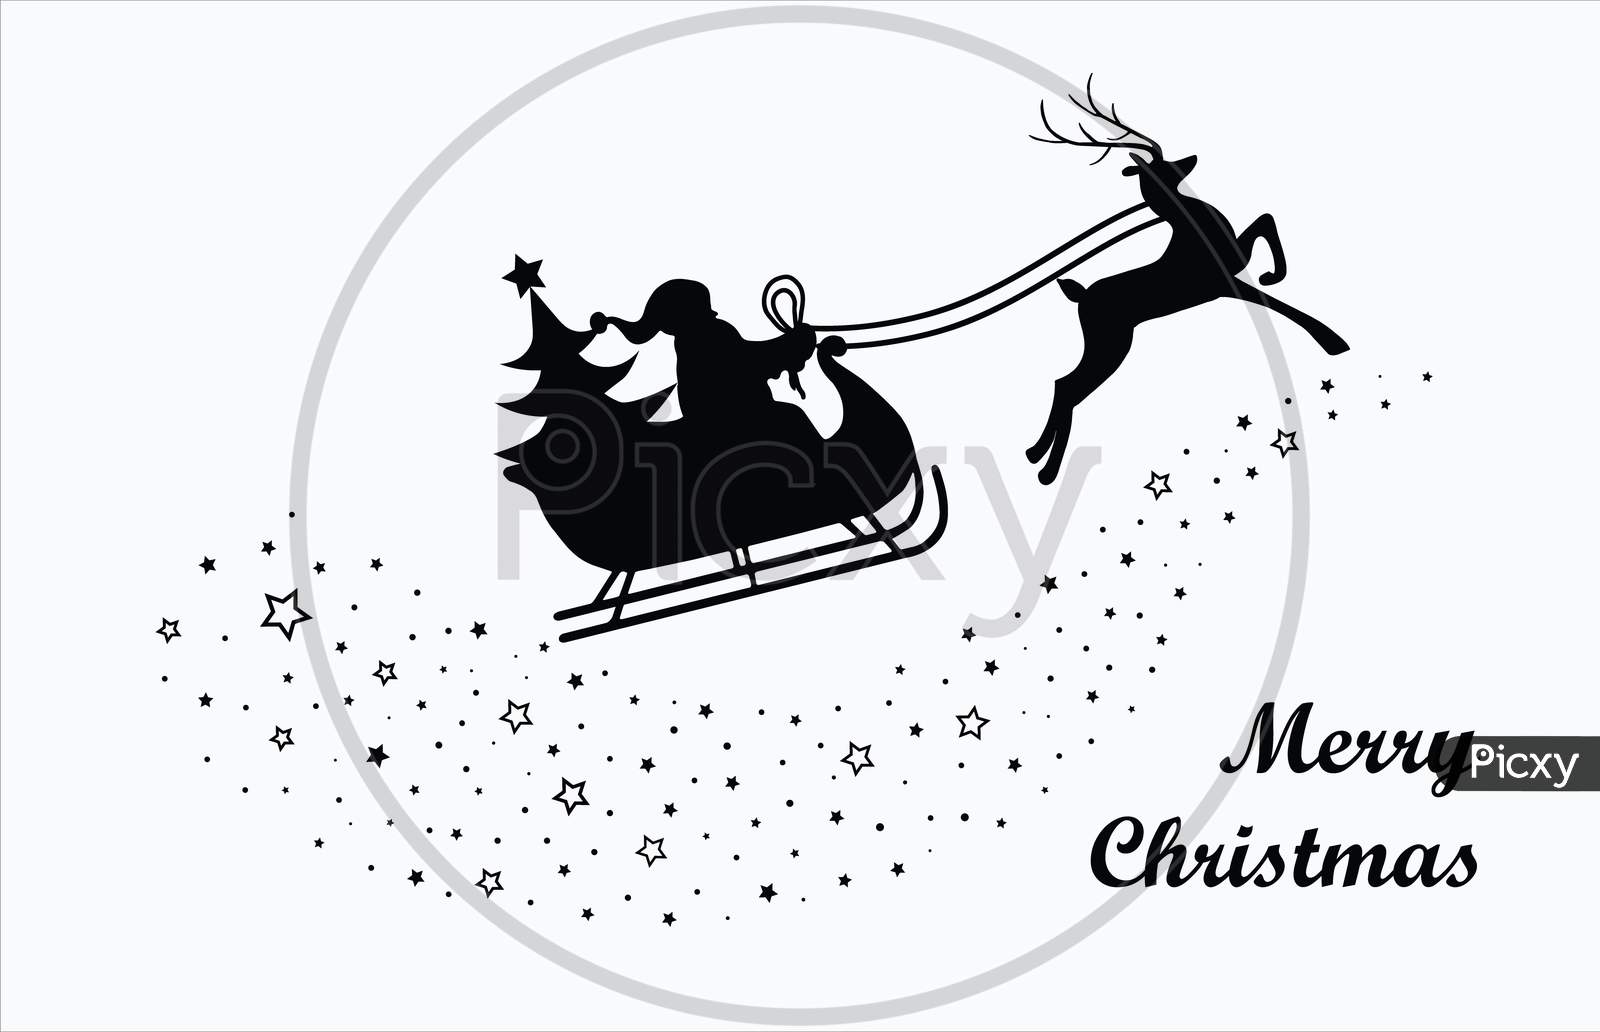 santa claus and reindeer clipart black and white